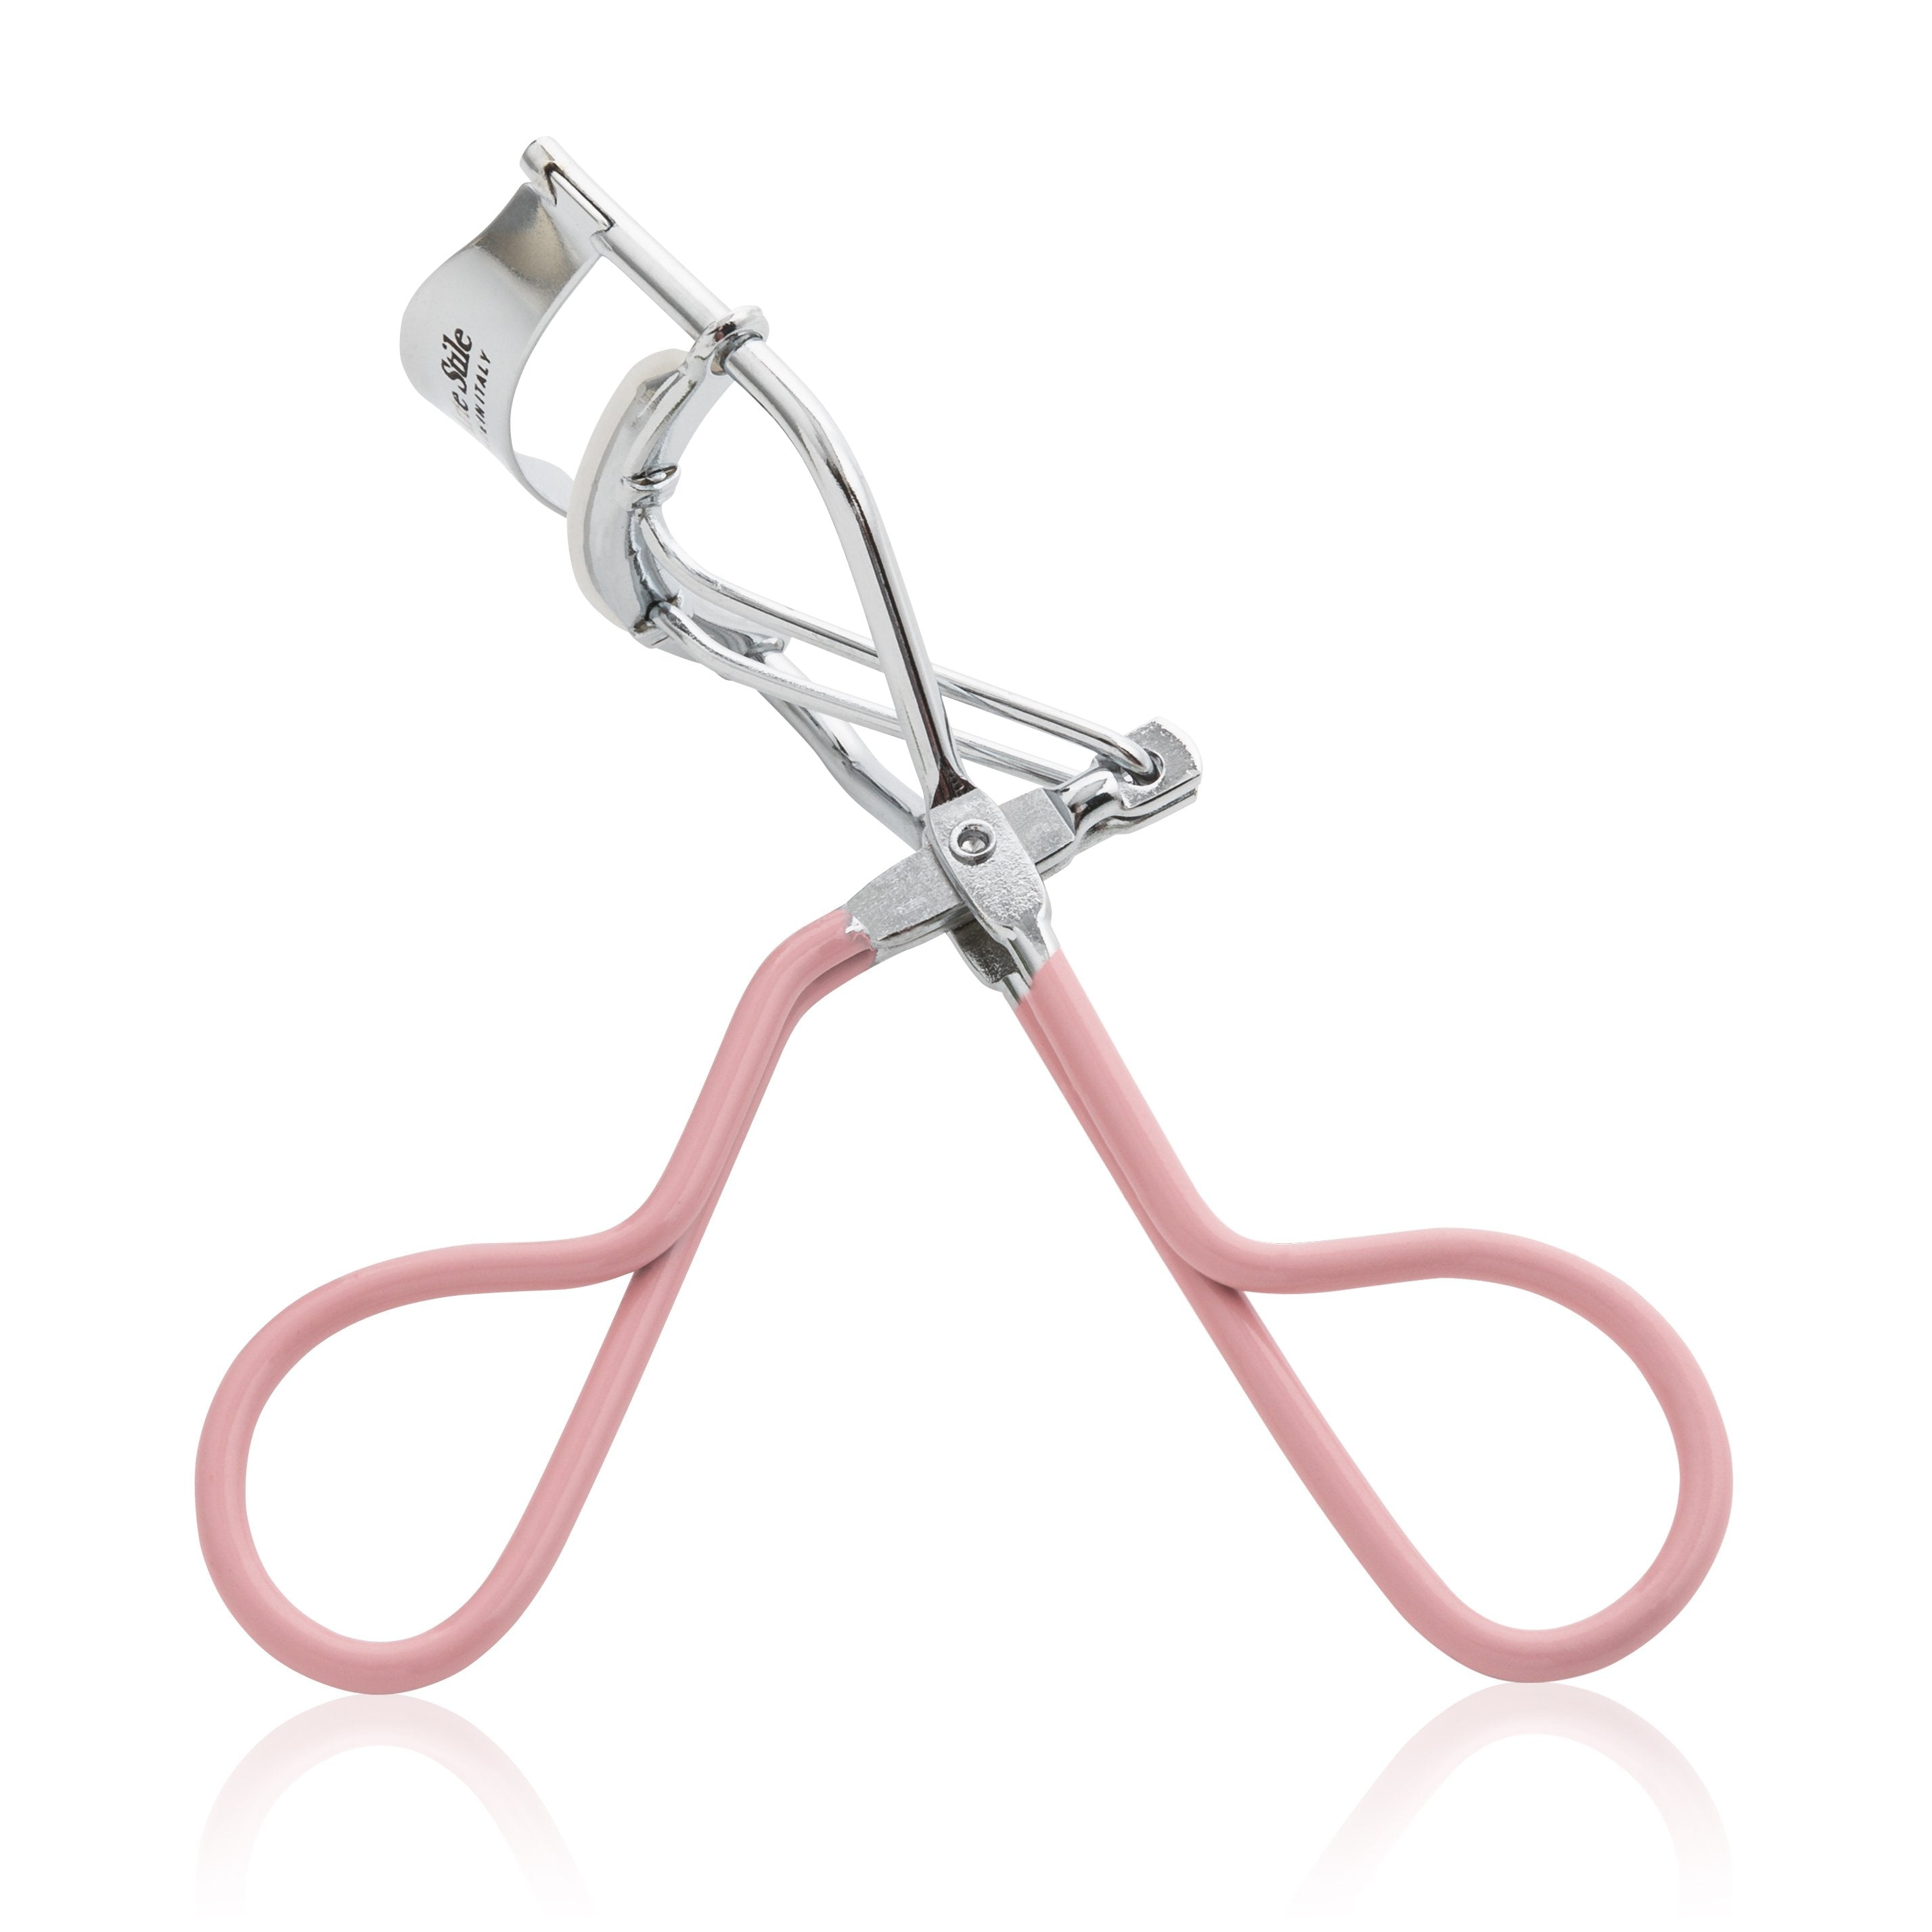 Get Perfect Lashes with the ArteStile Eyelash Curler in Rosé